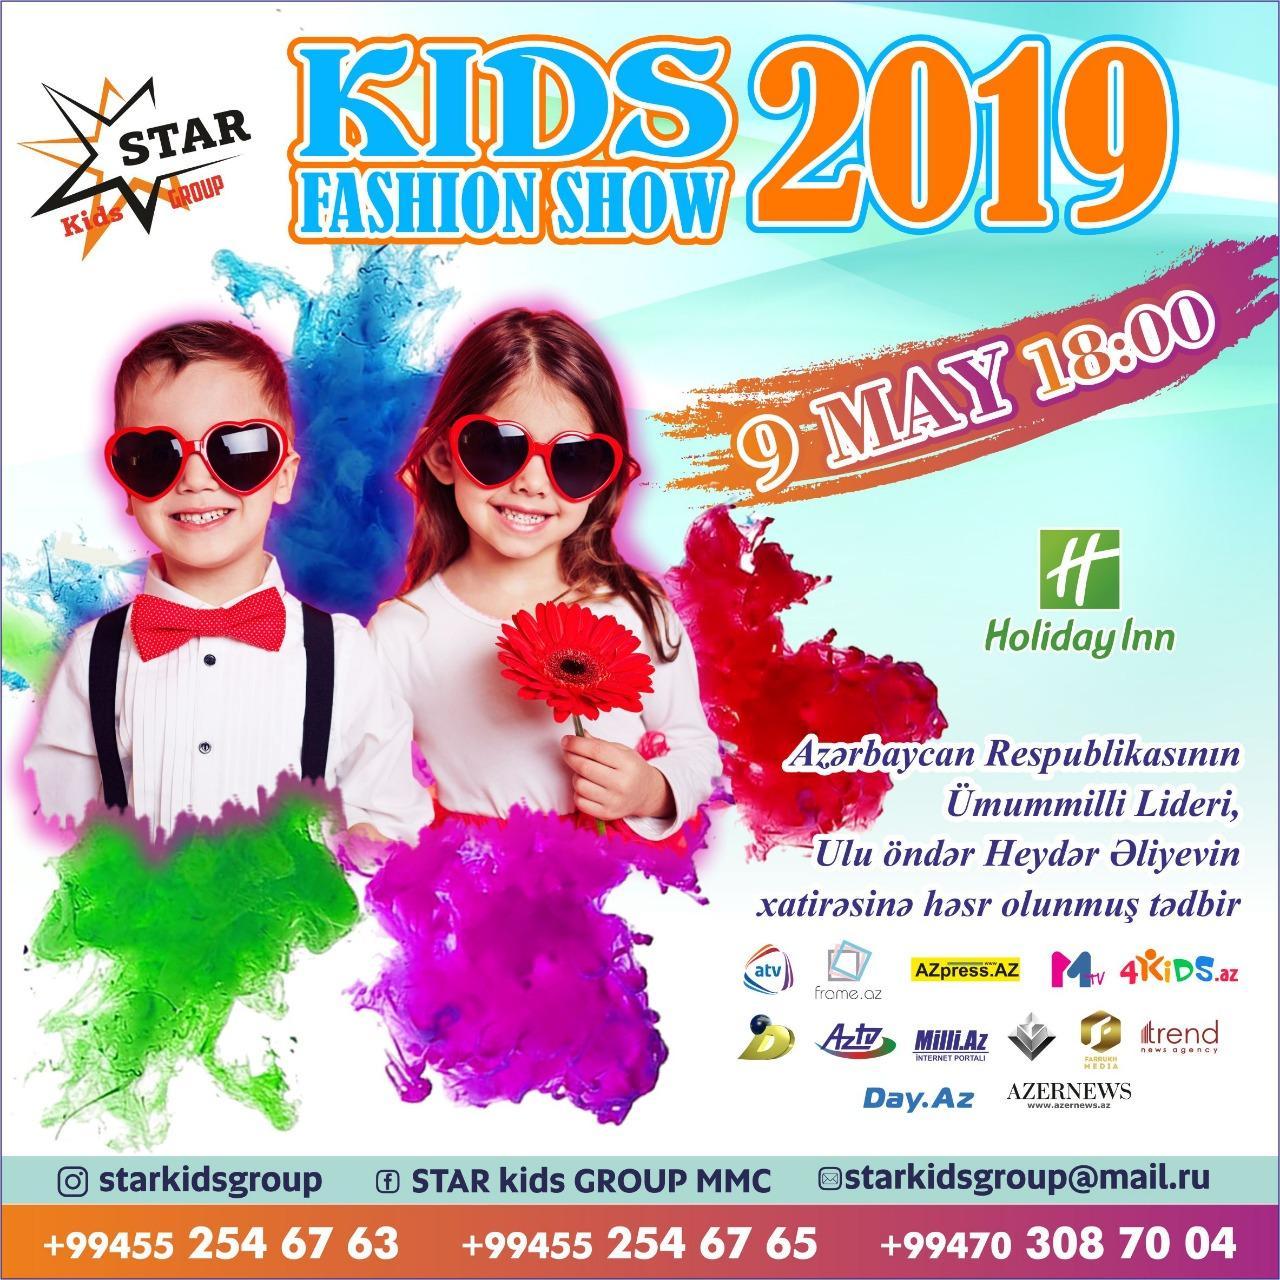 Kids Fashion Show 2019 due in capital